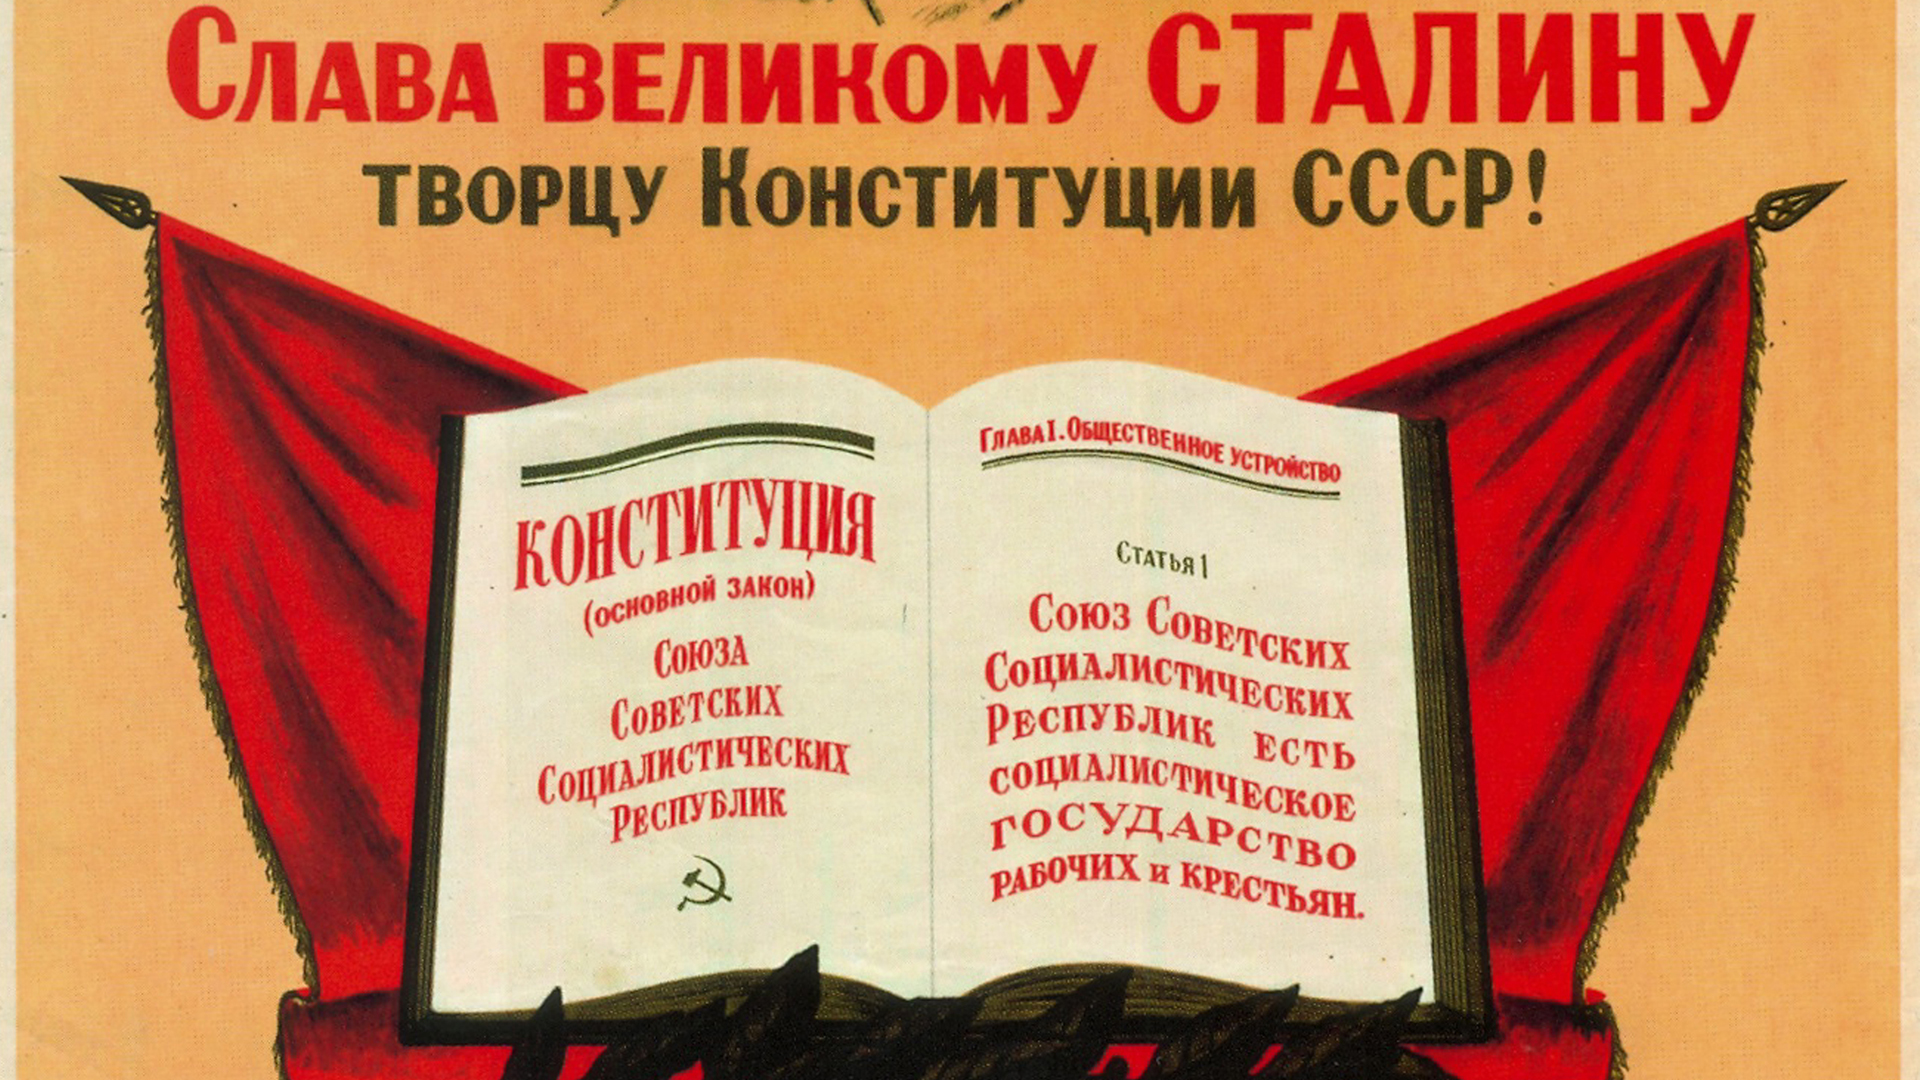 The Constitution of the USSR